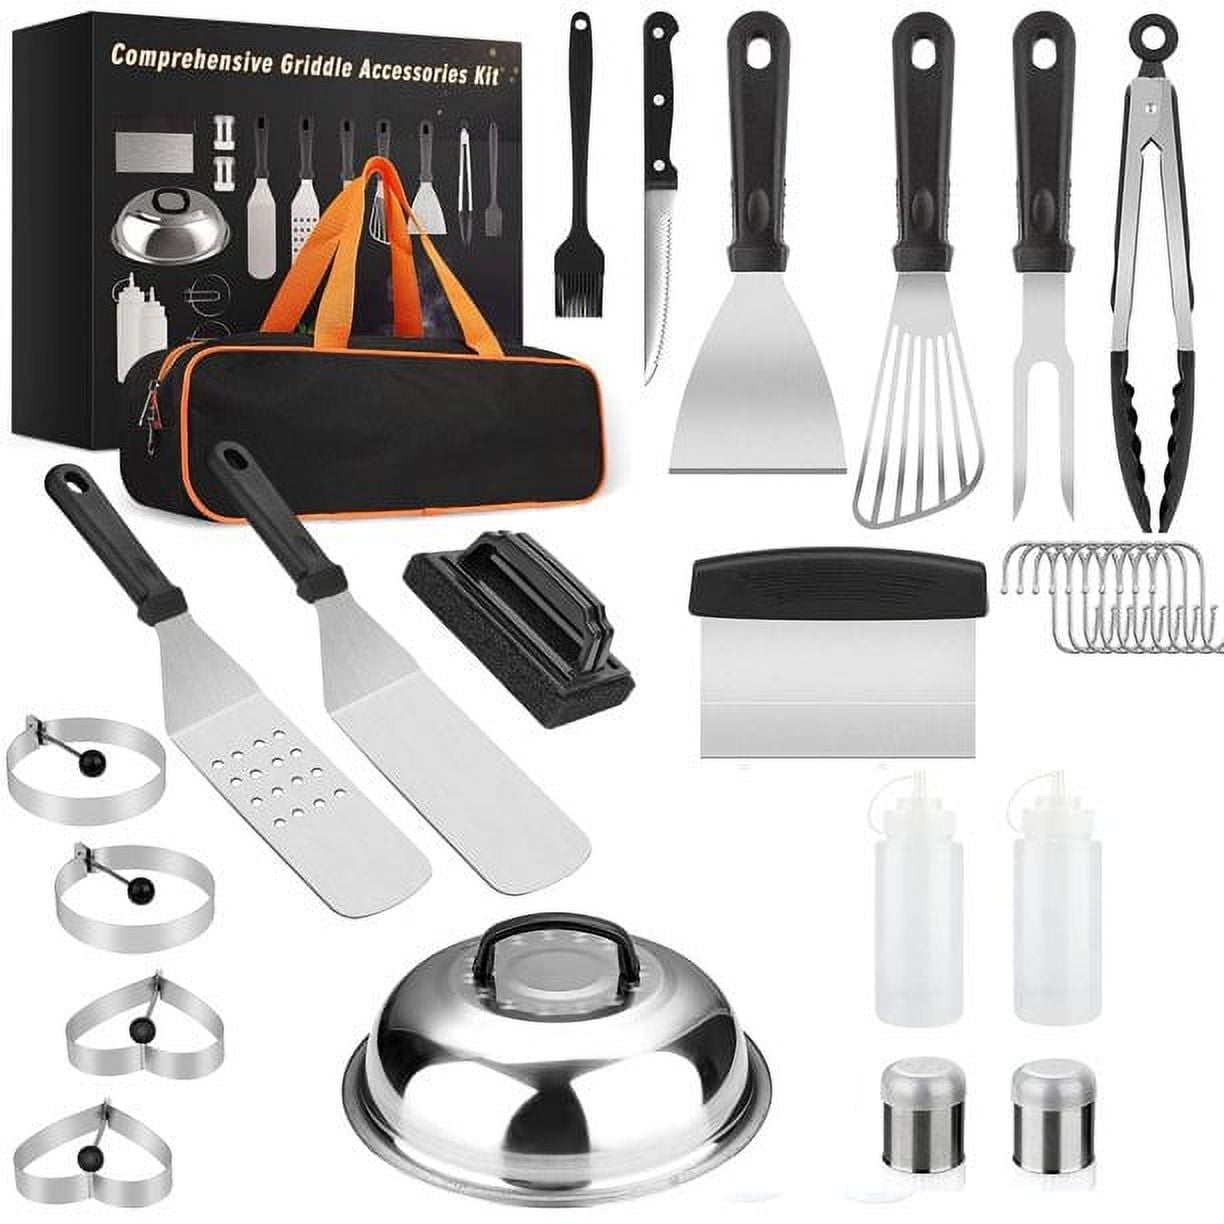 Blackstone Grill Accessories Kit, 29PC BBQ Griddle Tools Set for Outdoor  Camping